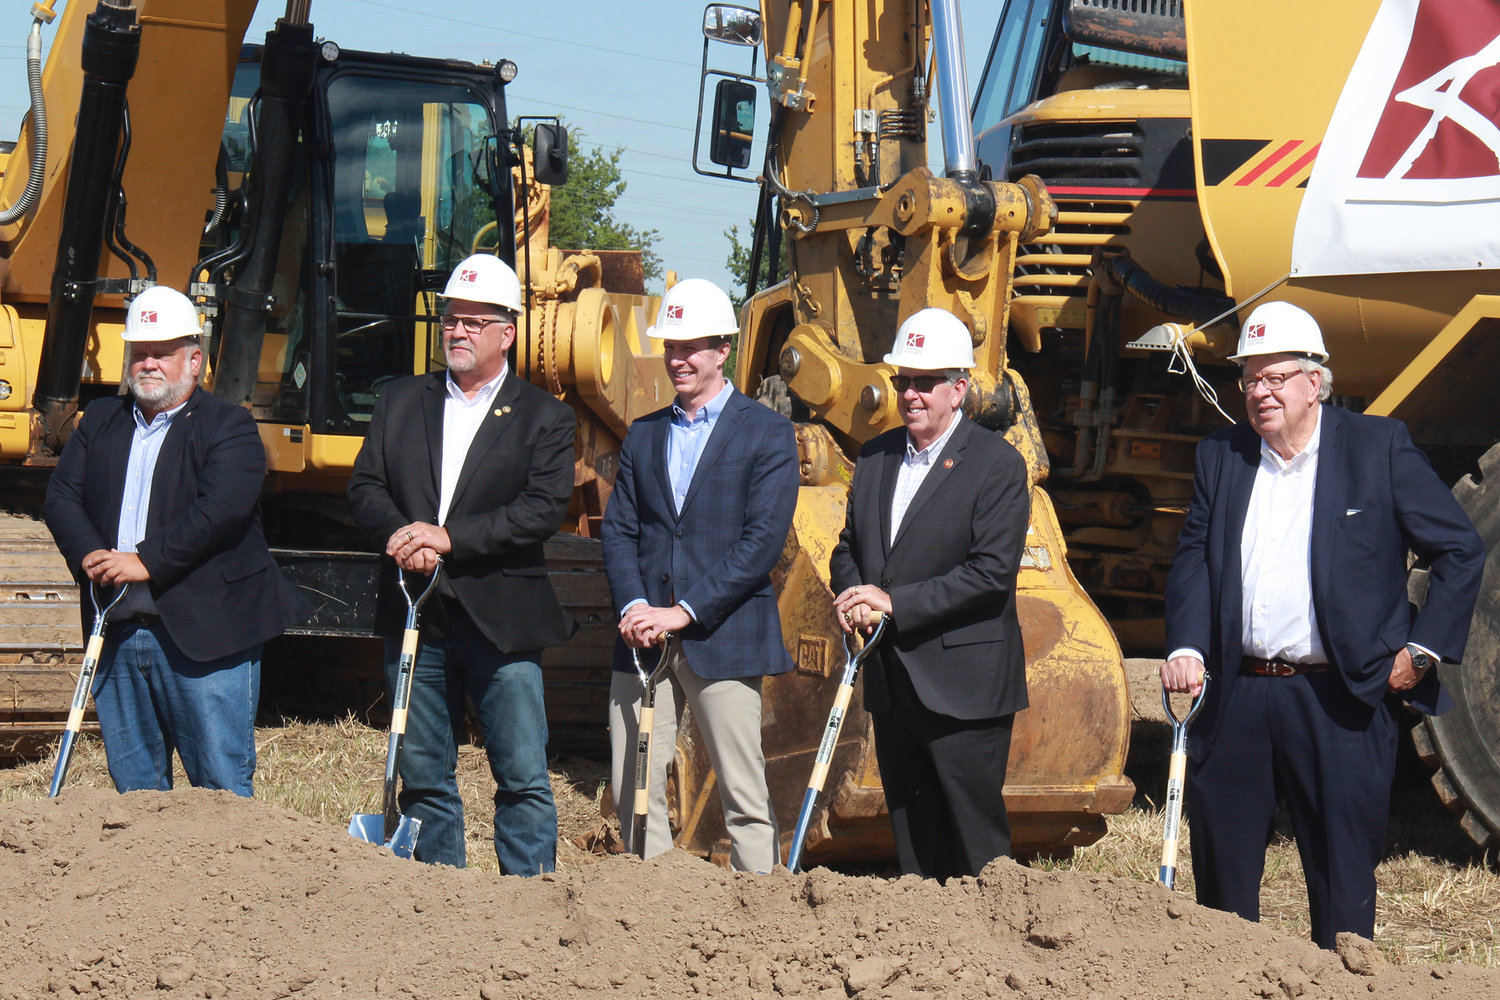 Among the delegates present to celebrate the ceremonial groundbreaking for American Foods Group's future beef plant in Warren County were, from left, Warren County Commissioners Matt Flake and Joe Gildehaus, AFG Executive Vice President Reid Rosen, Missouri Gov. Mike Parson, and AFG CEO Tom Rosen.